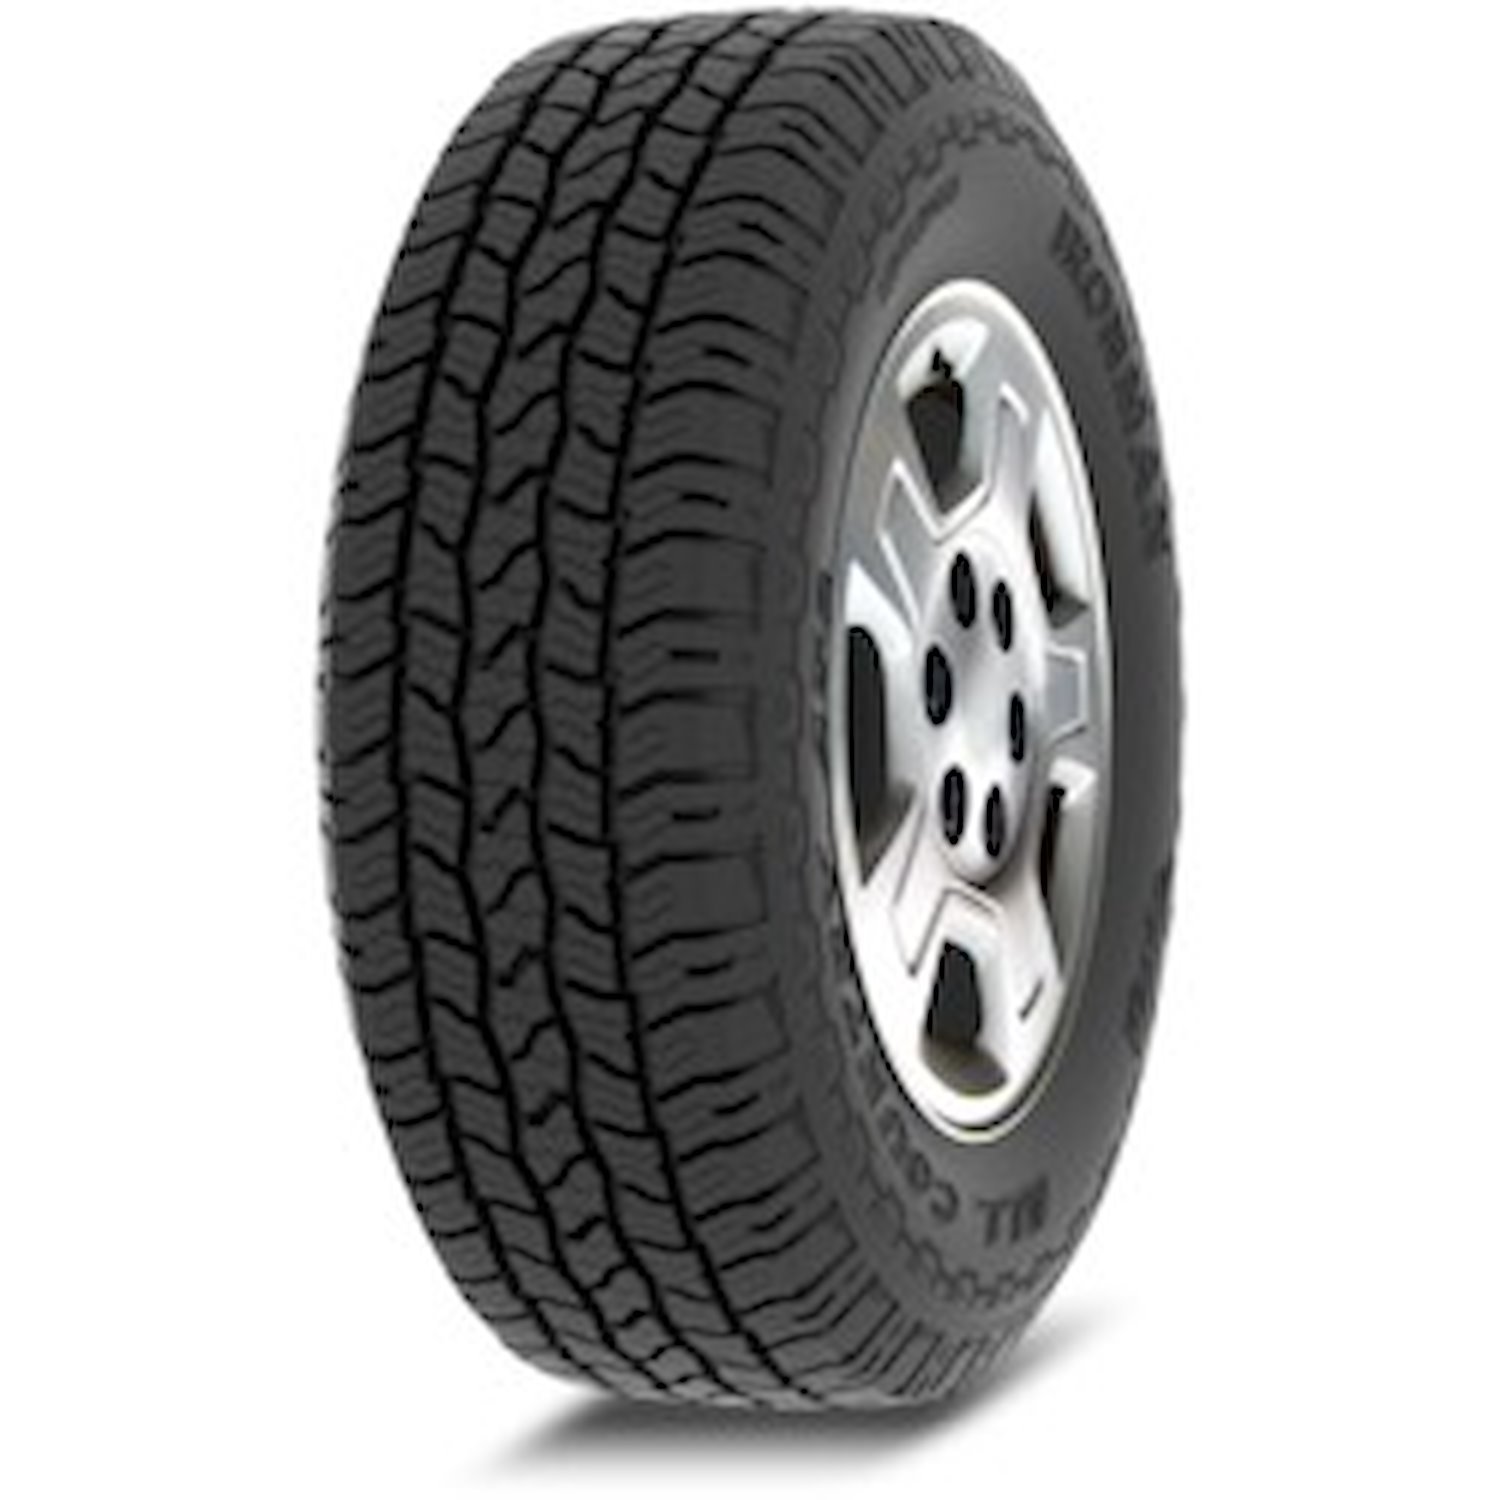 07694 All Country AT2 Tire, LT275/65R18, 123/120S